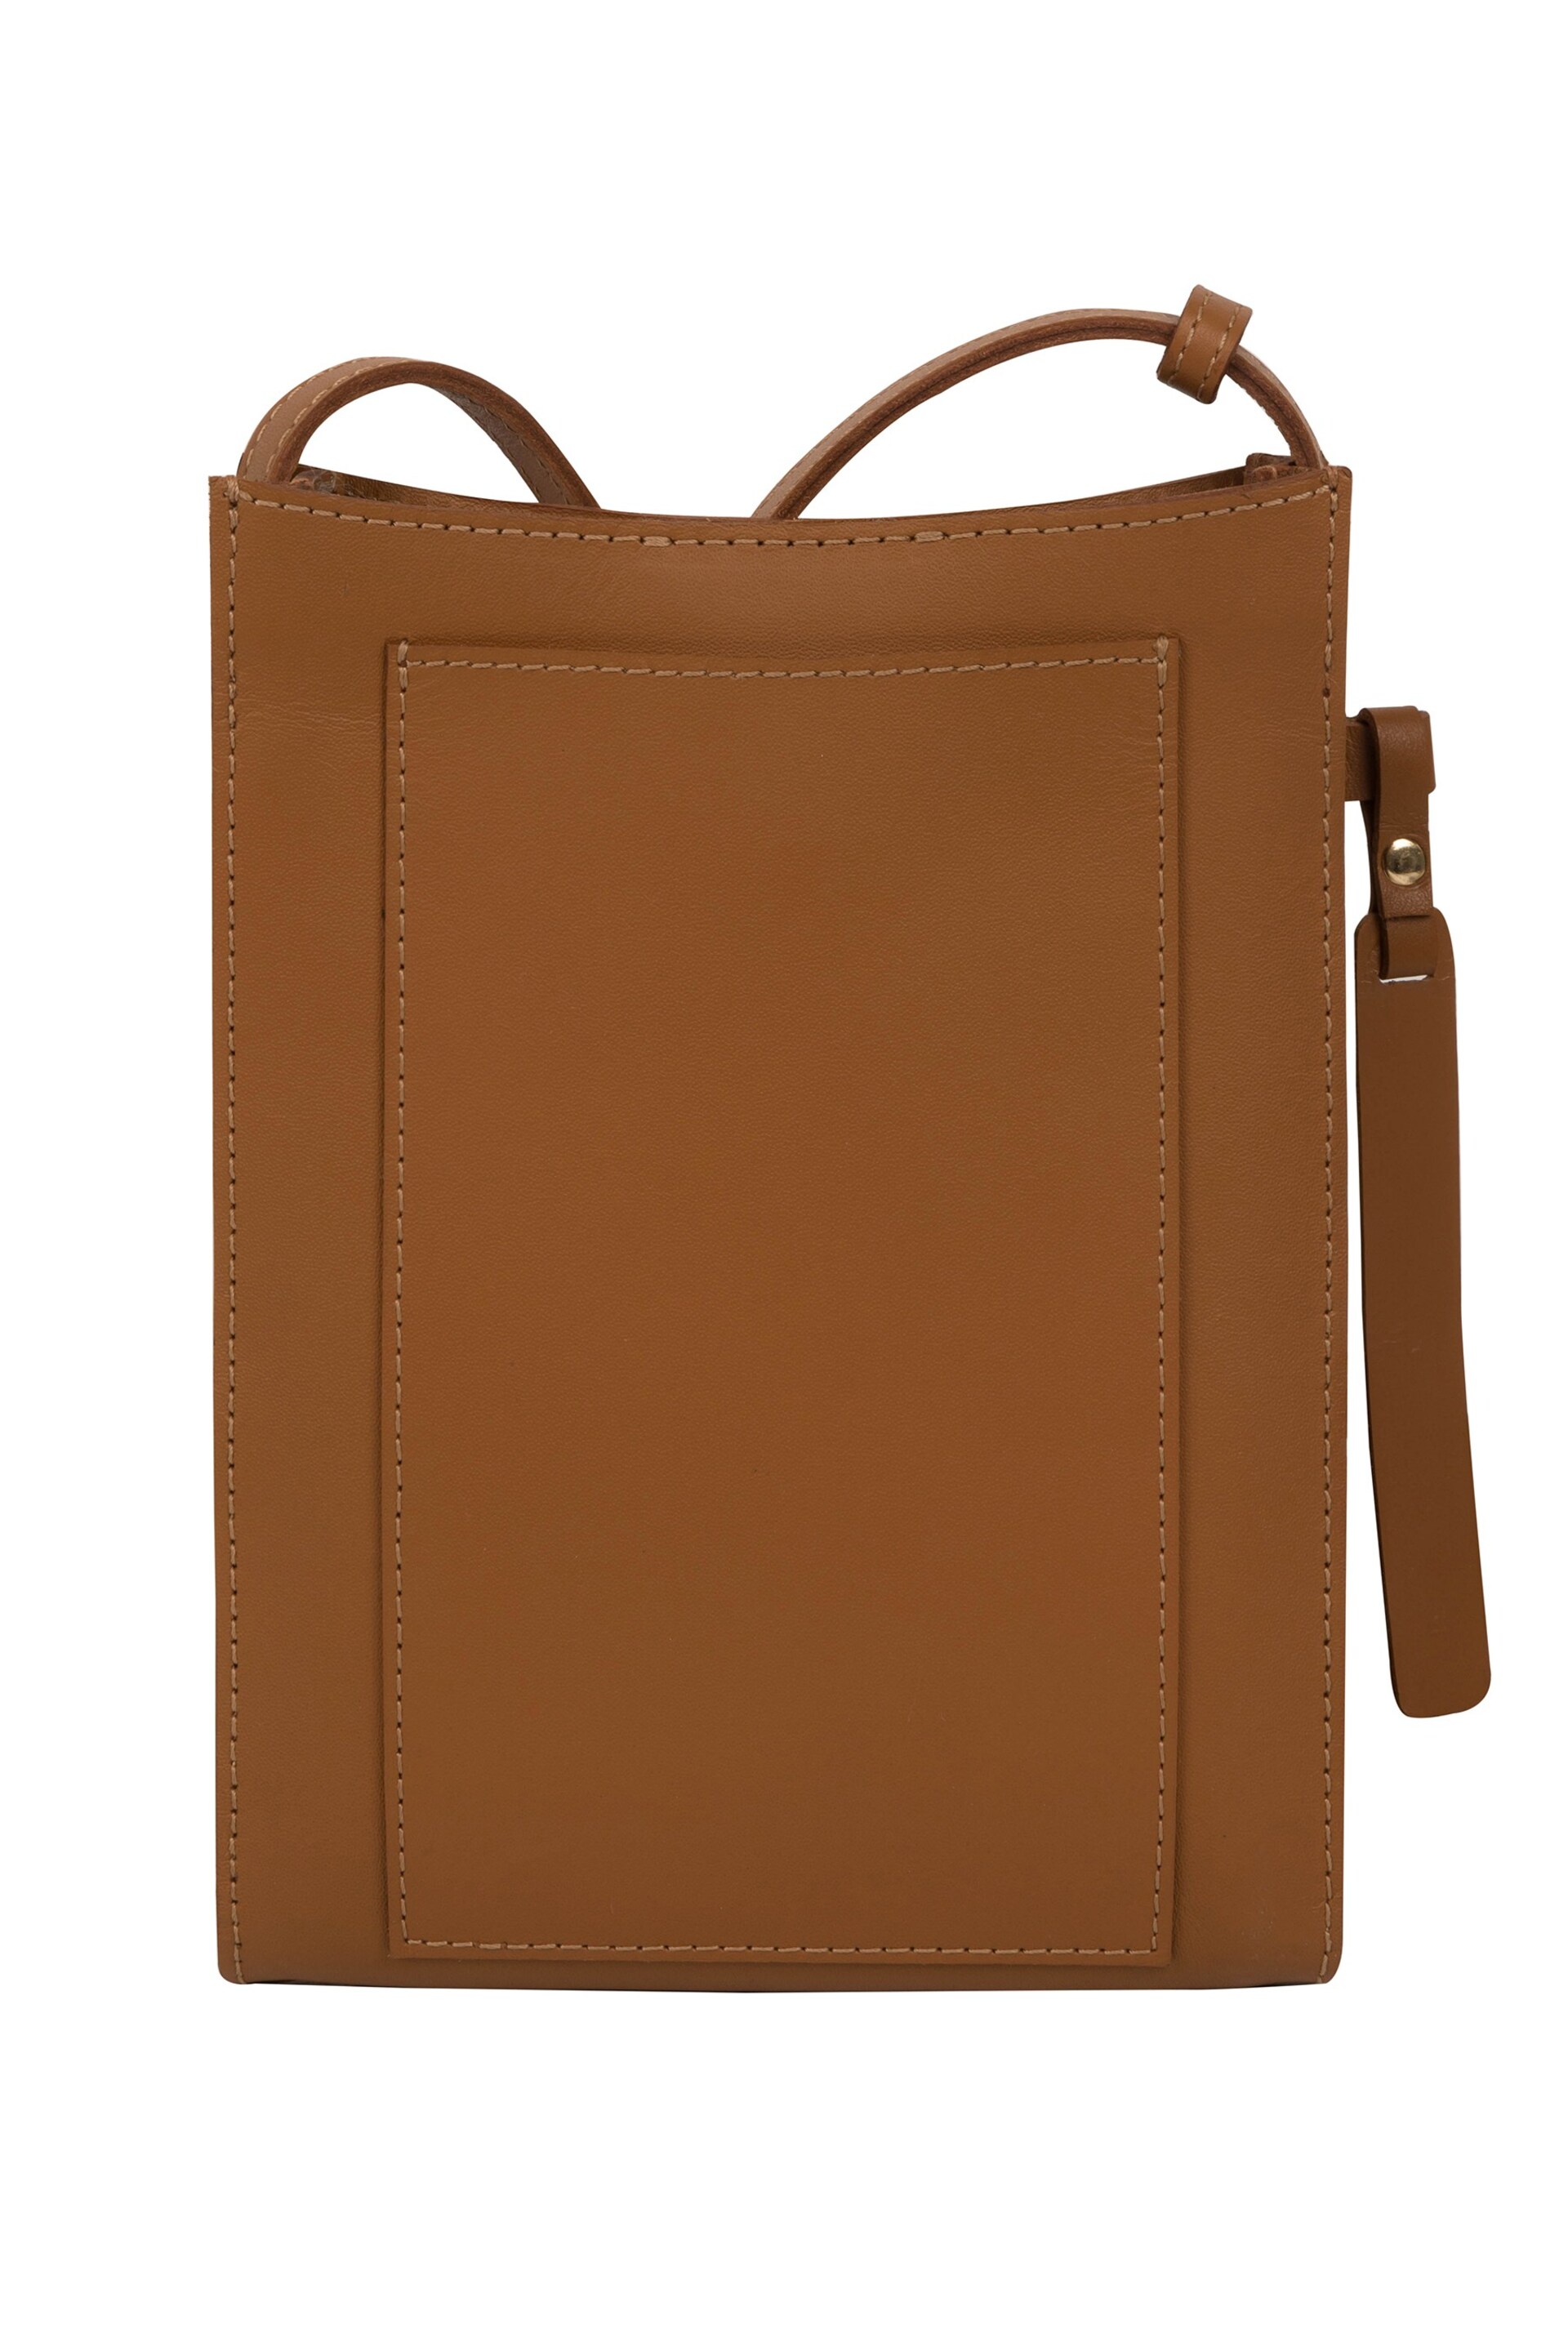 Pure Luxuries London Barton Vegetable Tanned Leather Cross-Body Phone Bag - Image 3 of 5